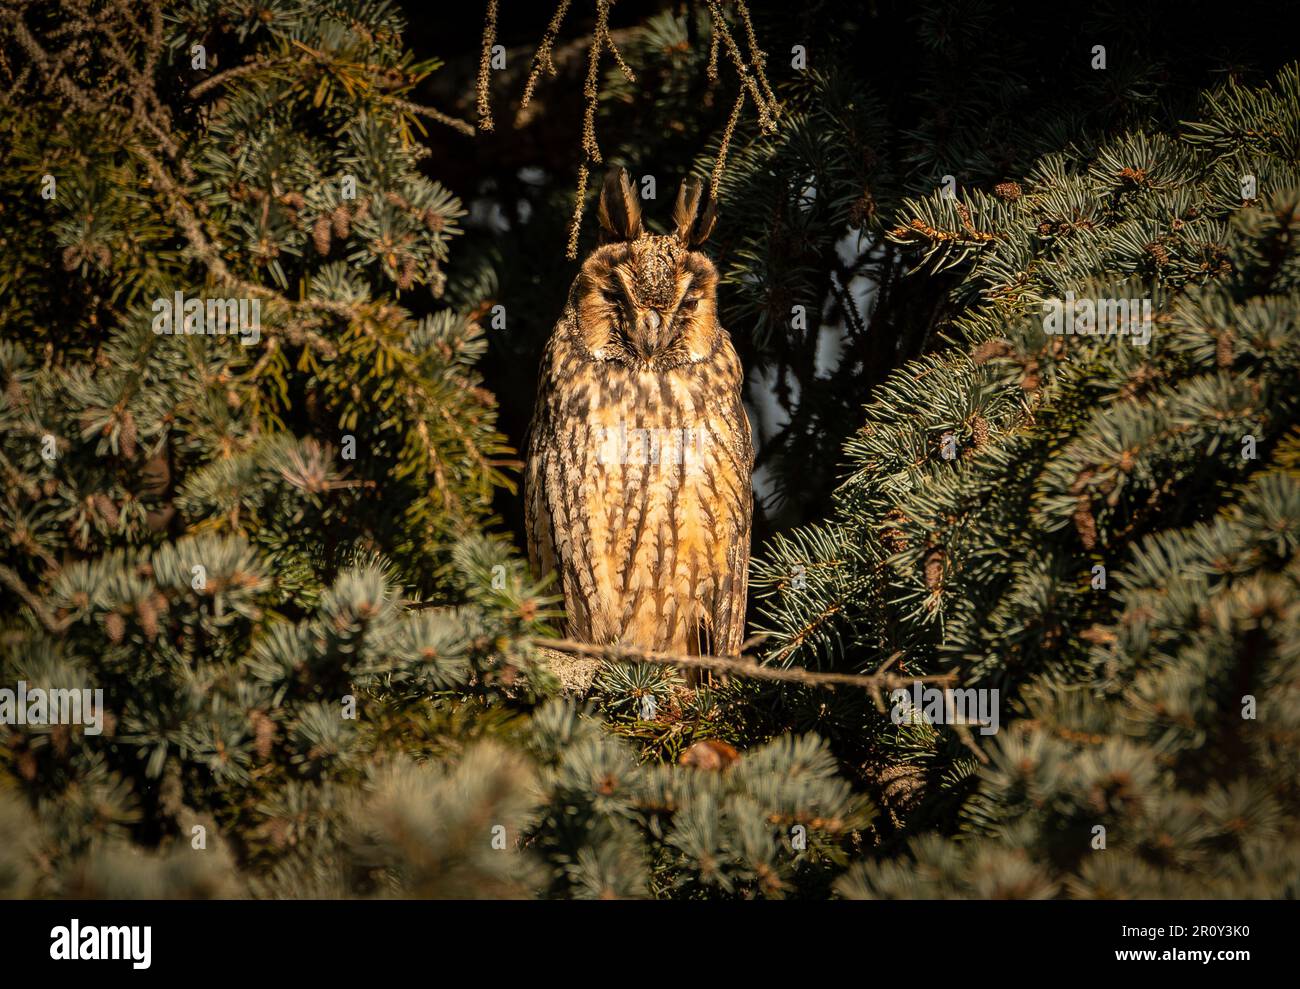 Long-eared owl (Asio otus). This kind of owl like to live near by people in winter time. They easier find any food in villages, small towns. I took th Stock Photo